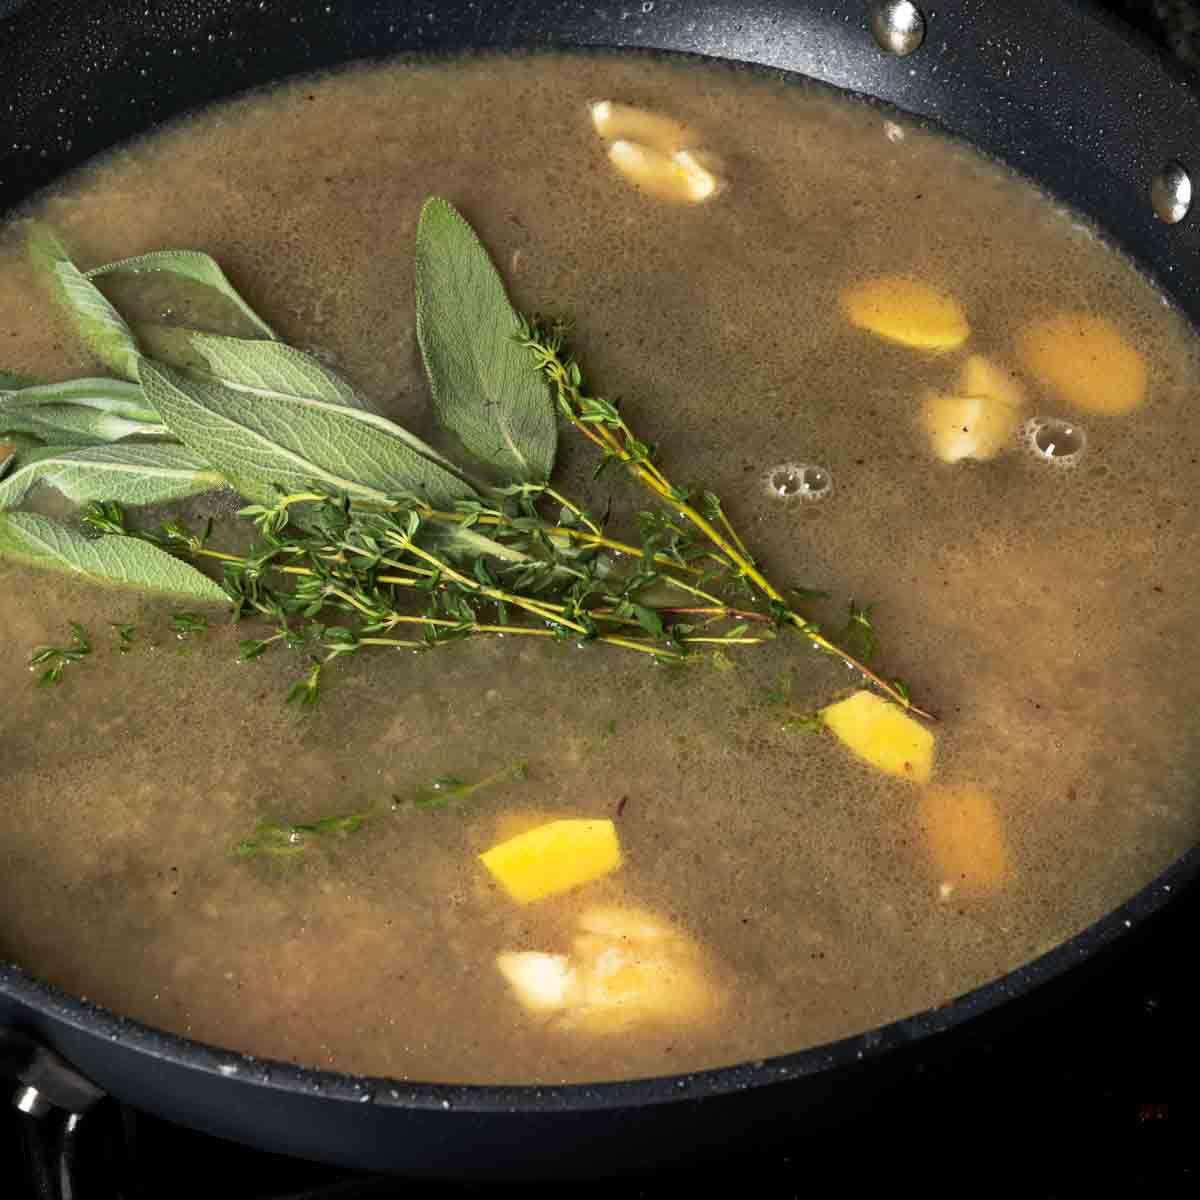 Bringing the cider braising liquid and aromatics to a simmer